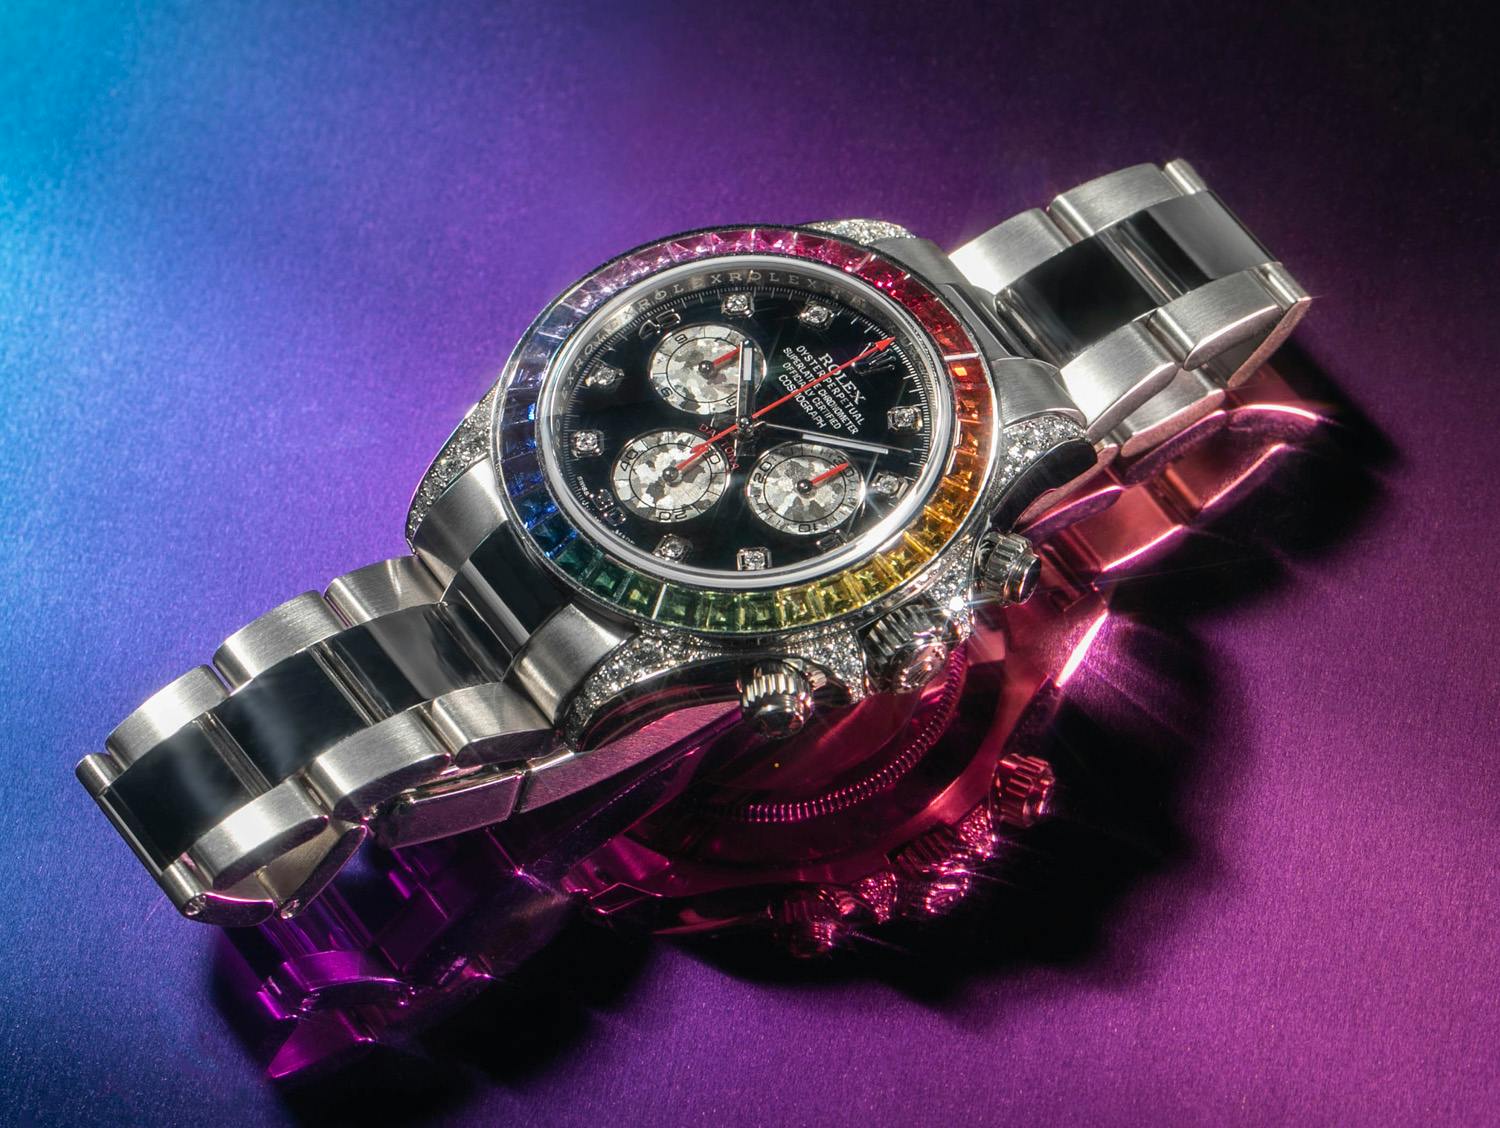 The Rolex Rainbow Daytona chronograph watch shimmers atop a blue and purple backdrop.